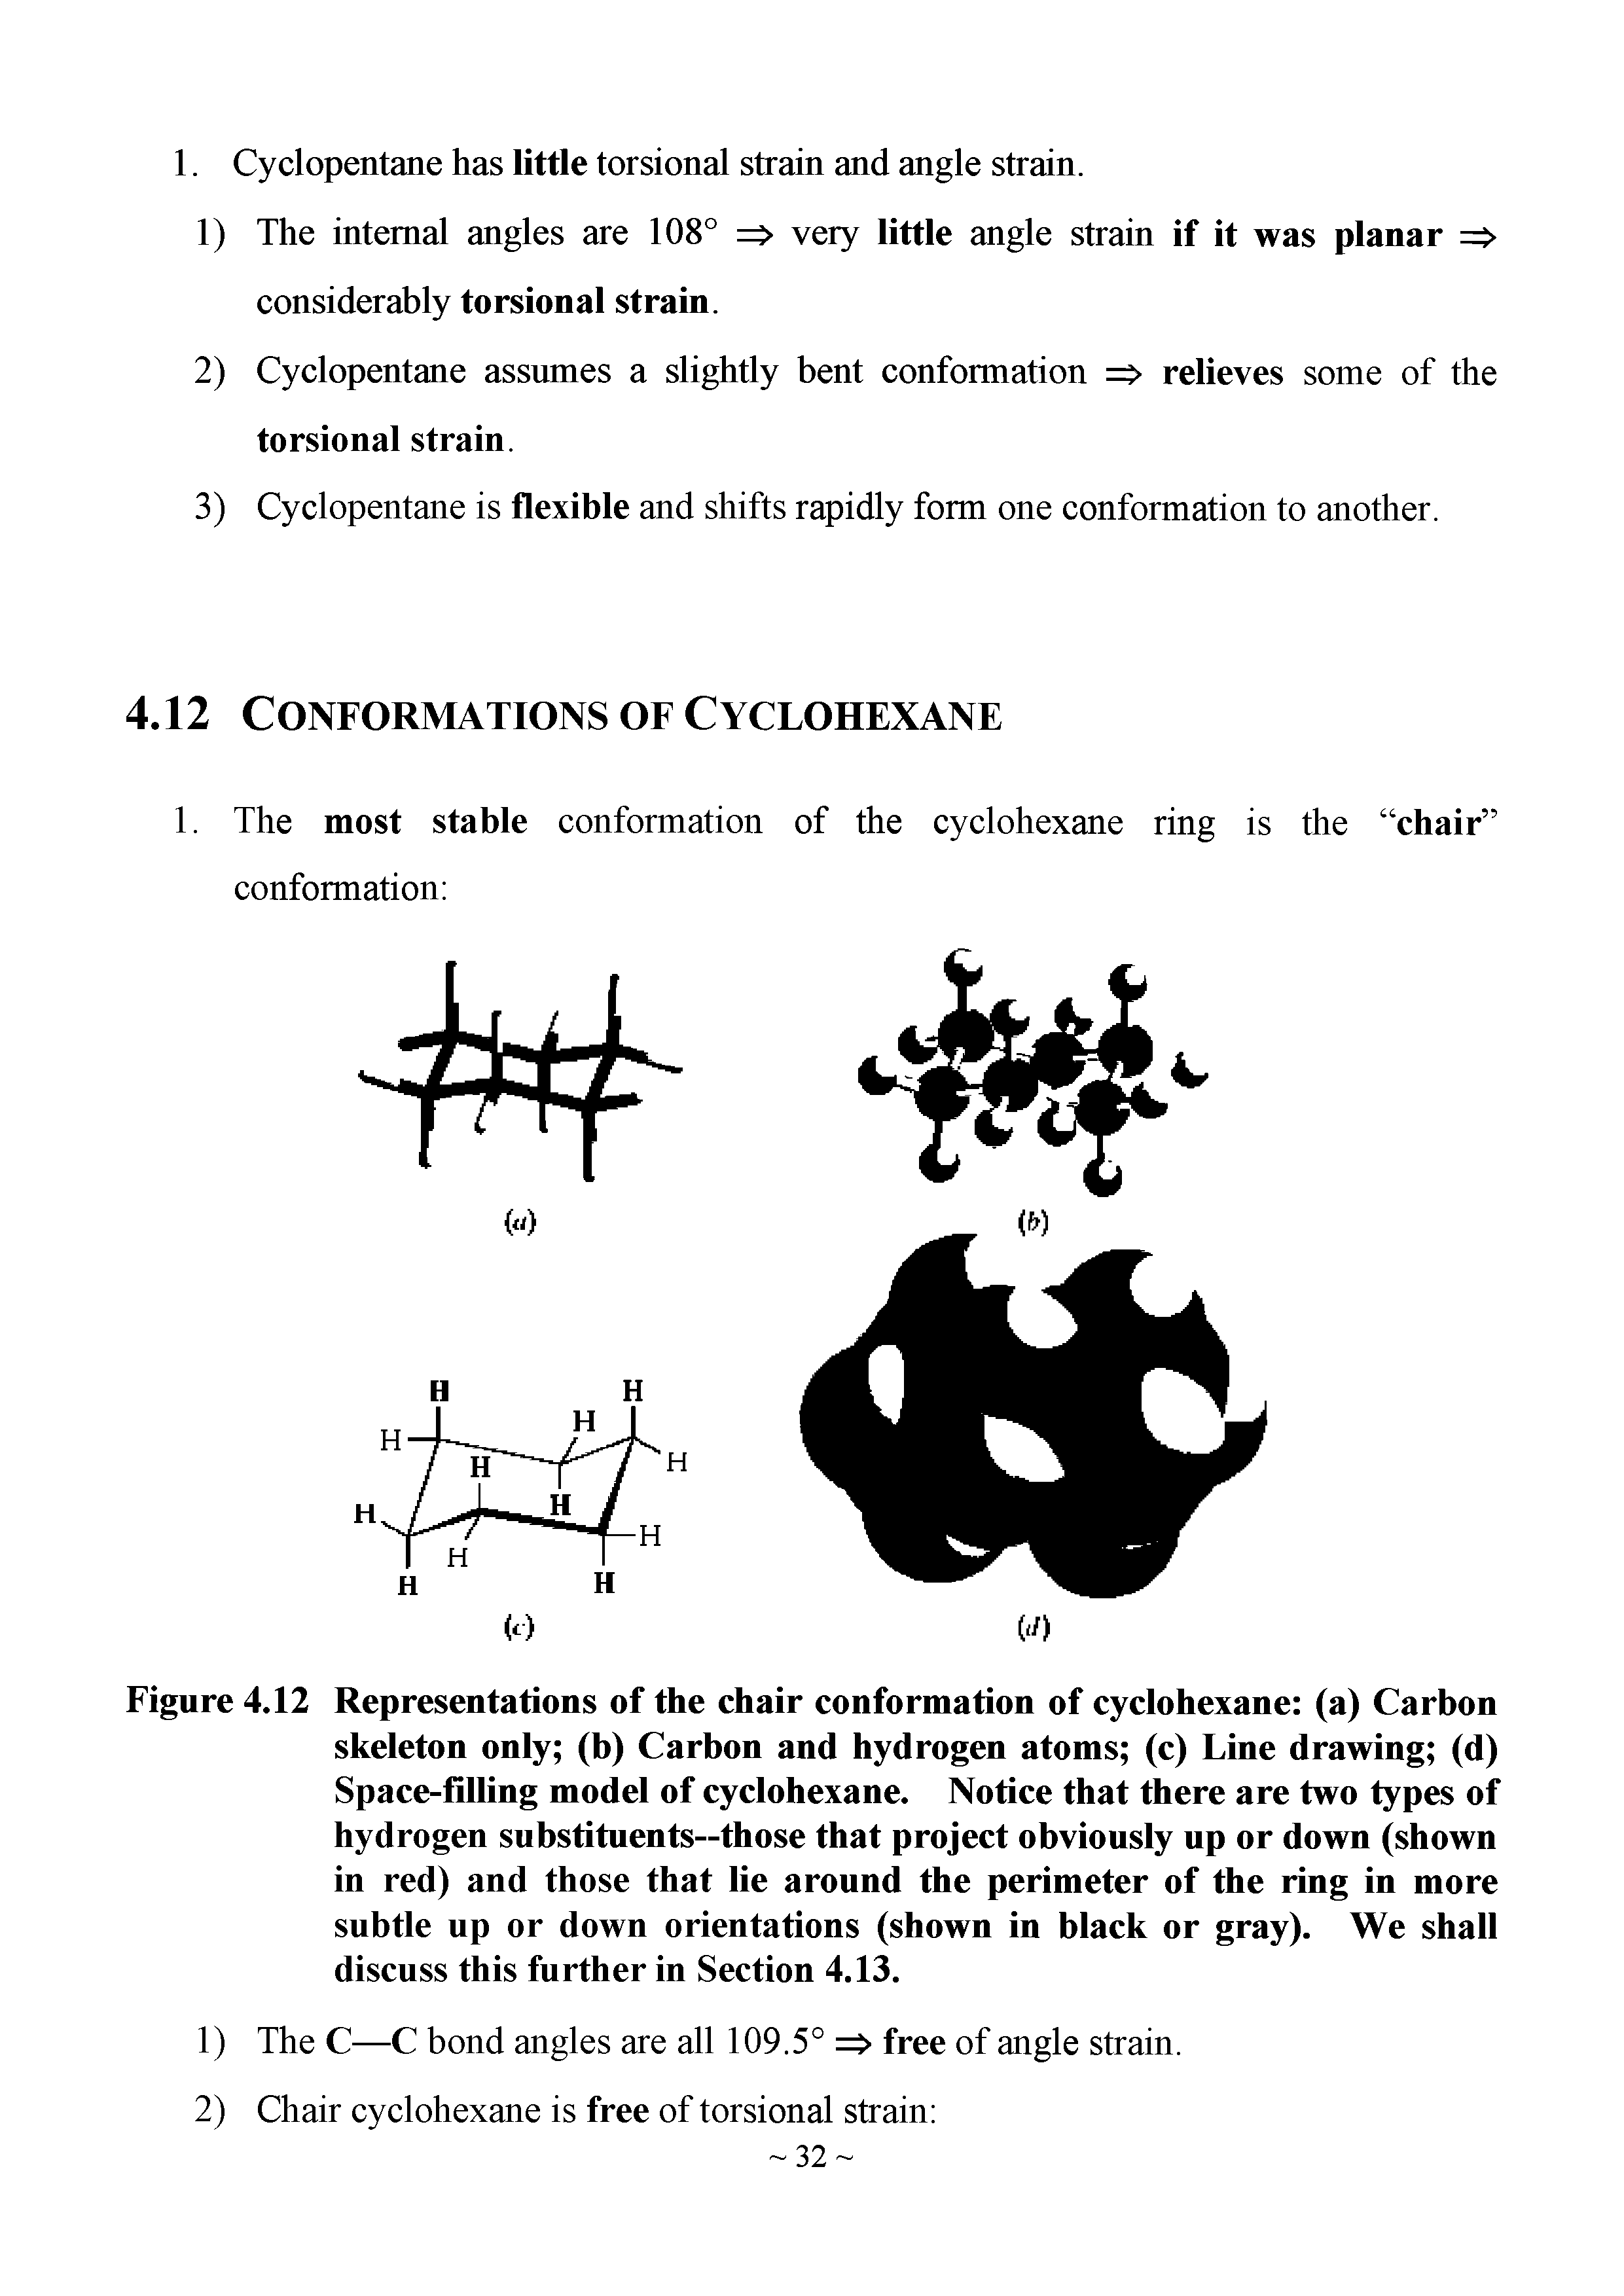 Figure 4.12 Representations of the chair conformation of cyclohexane (a) Carbon skeleton only (b) Carbon and hydrogen atoms (c) Line drawing (d) Space-filling model of cyclohexane. Notice that there are two types of hydrogen substituents—those that project obviously up or down (shown in red) and those that lie around the perimeter of the ring in more subtle up or down orientations (shown in black or gray). We shall discuss this further in Section 4.13.